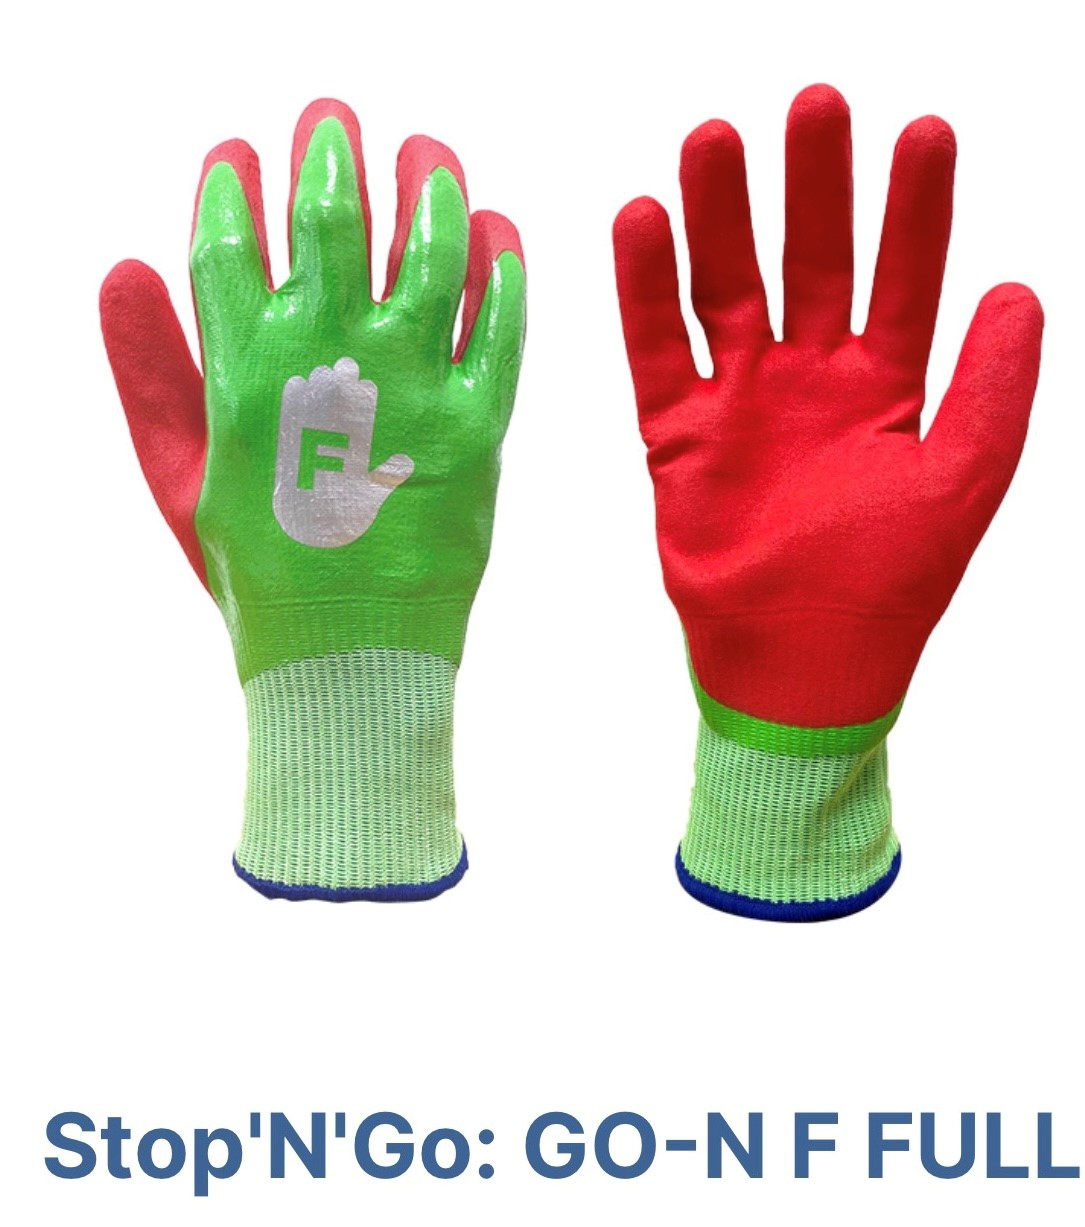 NEW PRODUCT ANNOUNCEMENT: Stop’N’Go: GO N F Full (40189)